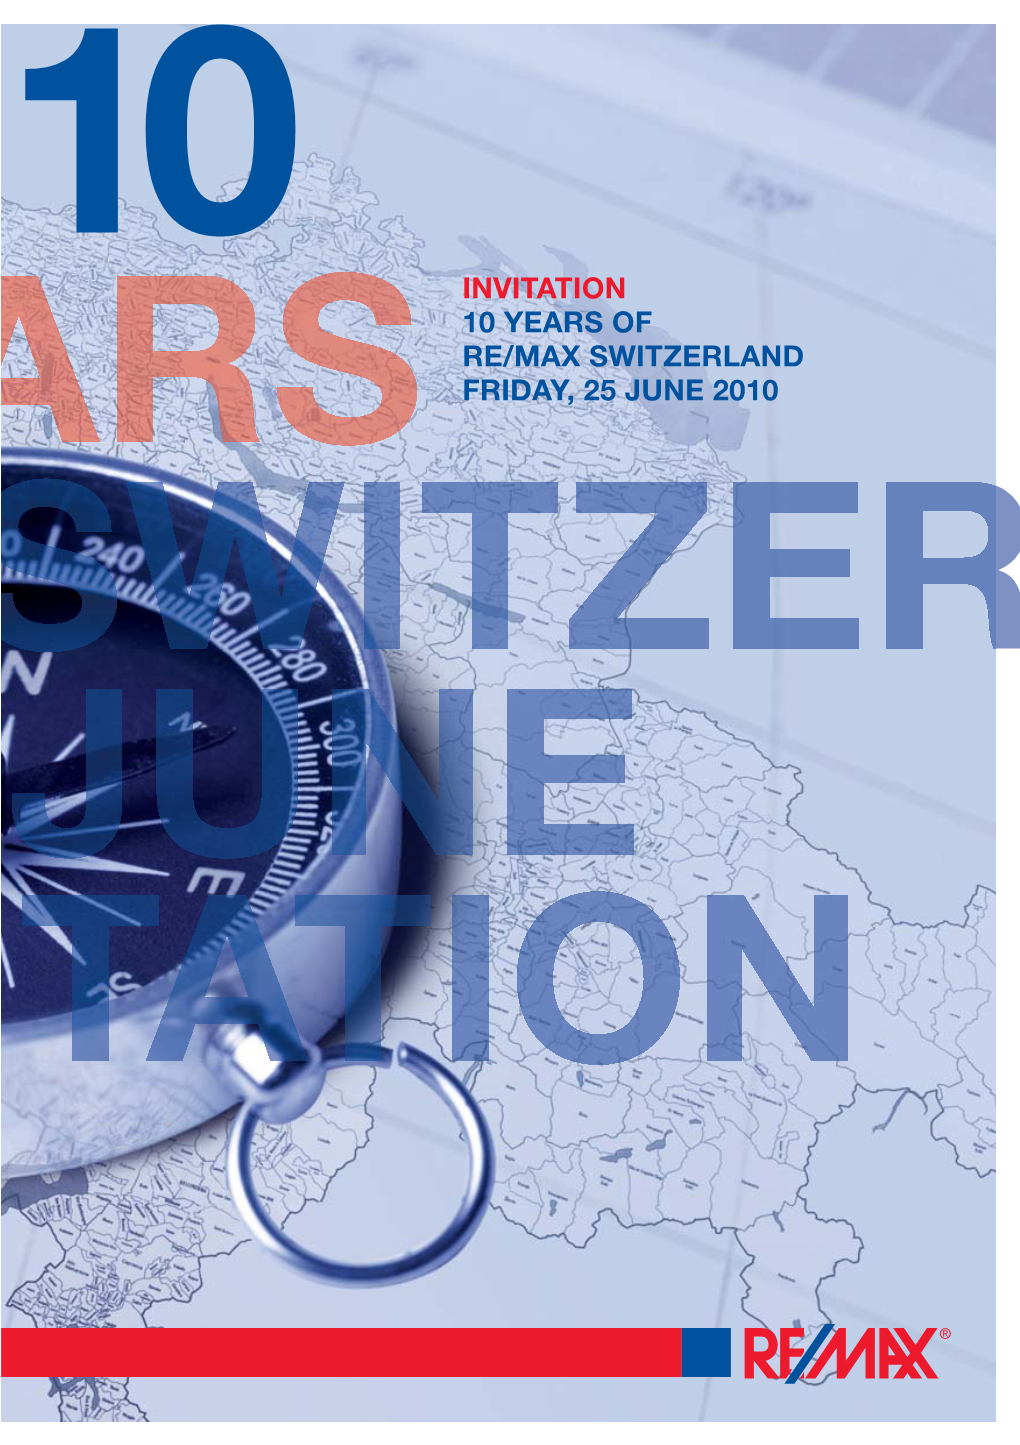 INVITATION 10 YEARS of RE/MAX SWITZERLAND FRIDAY, 25 JUNE 2010 R Welcome Aboard!